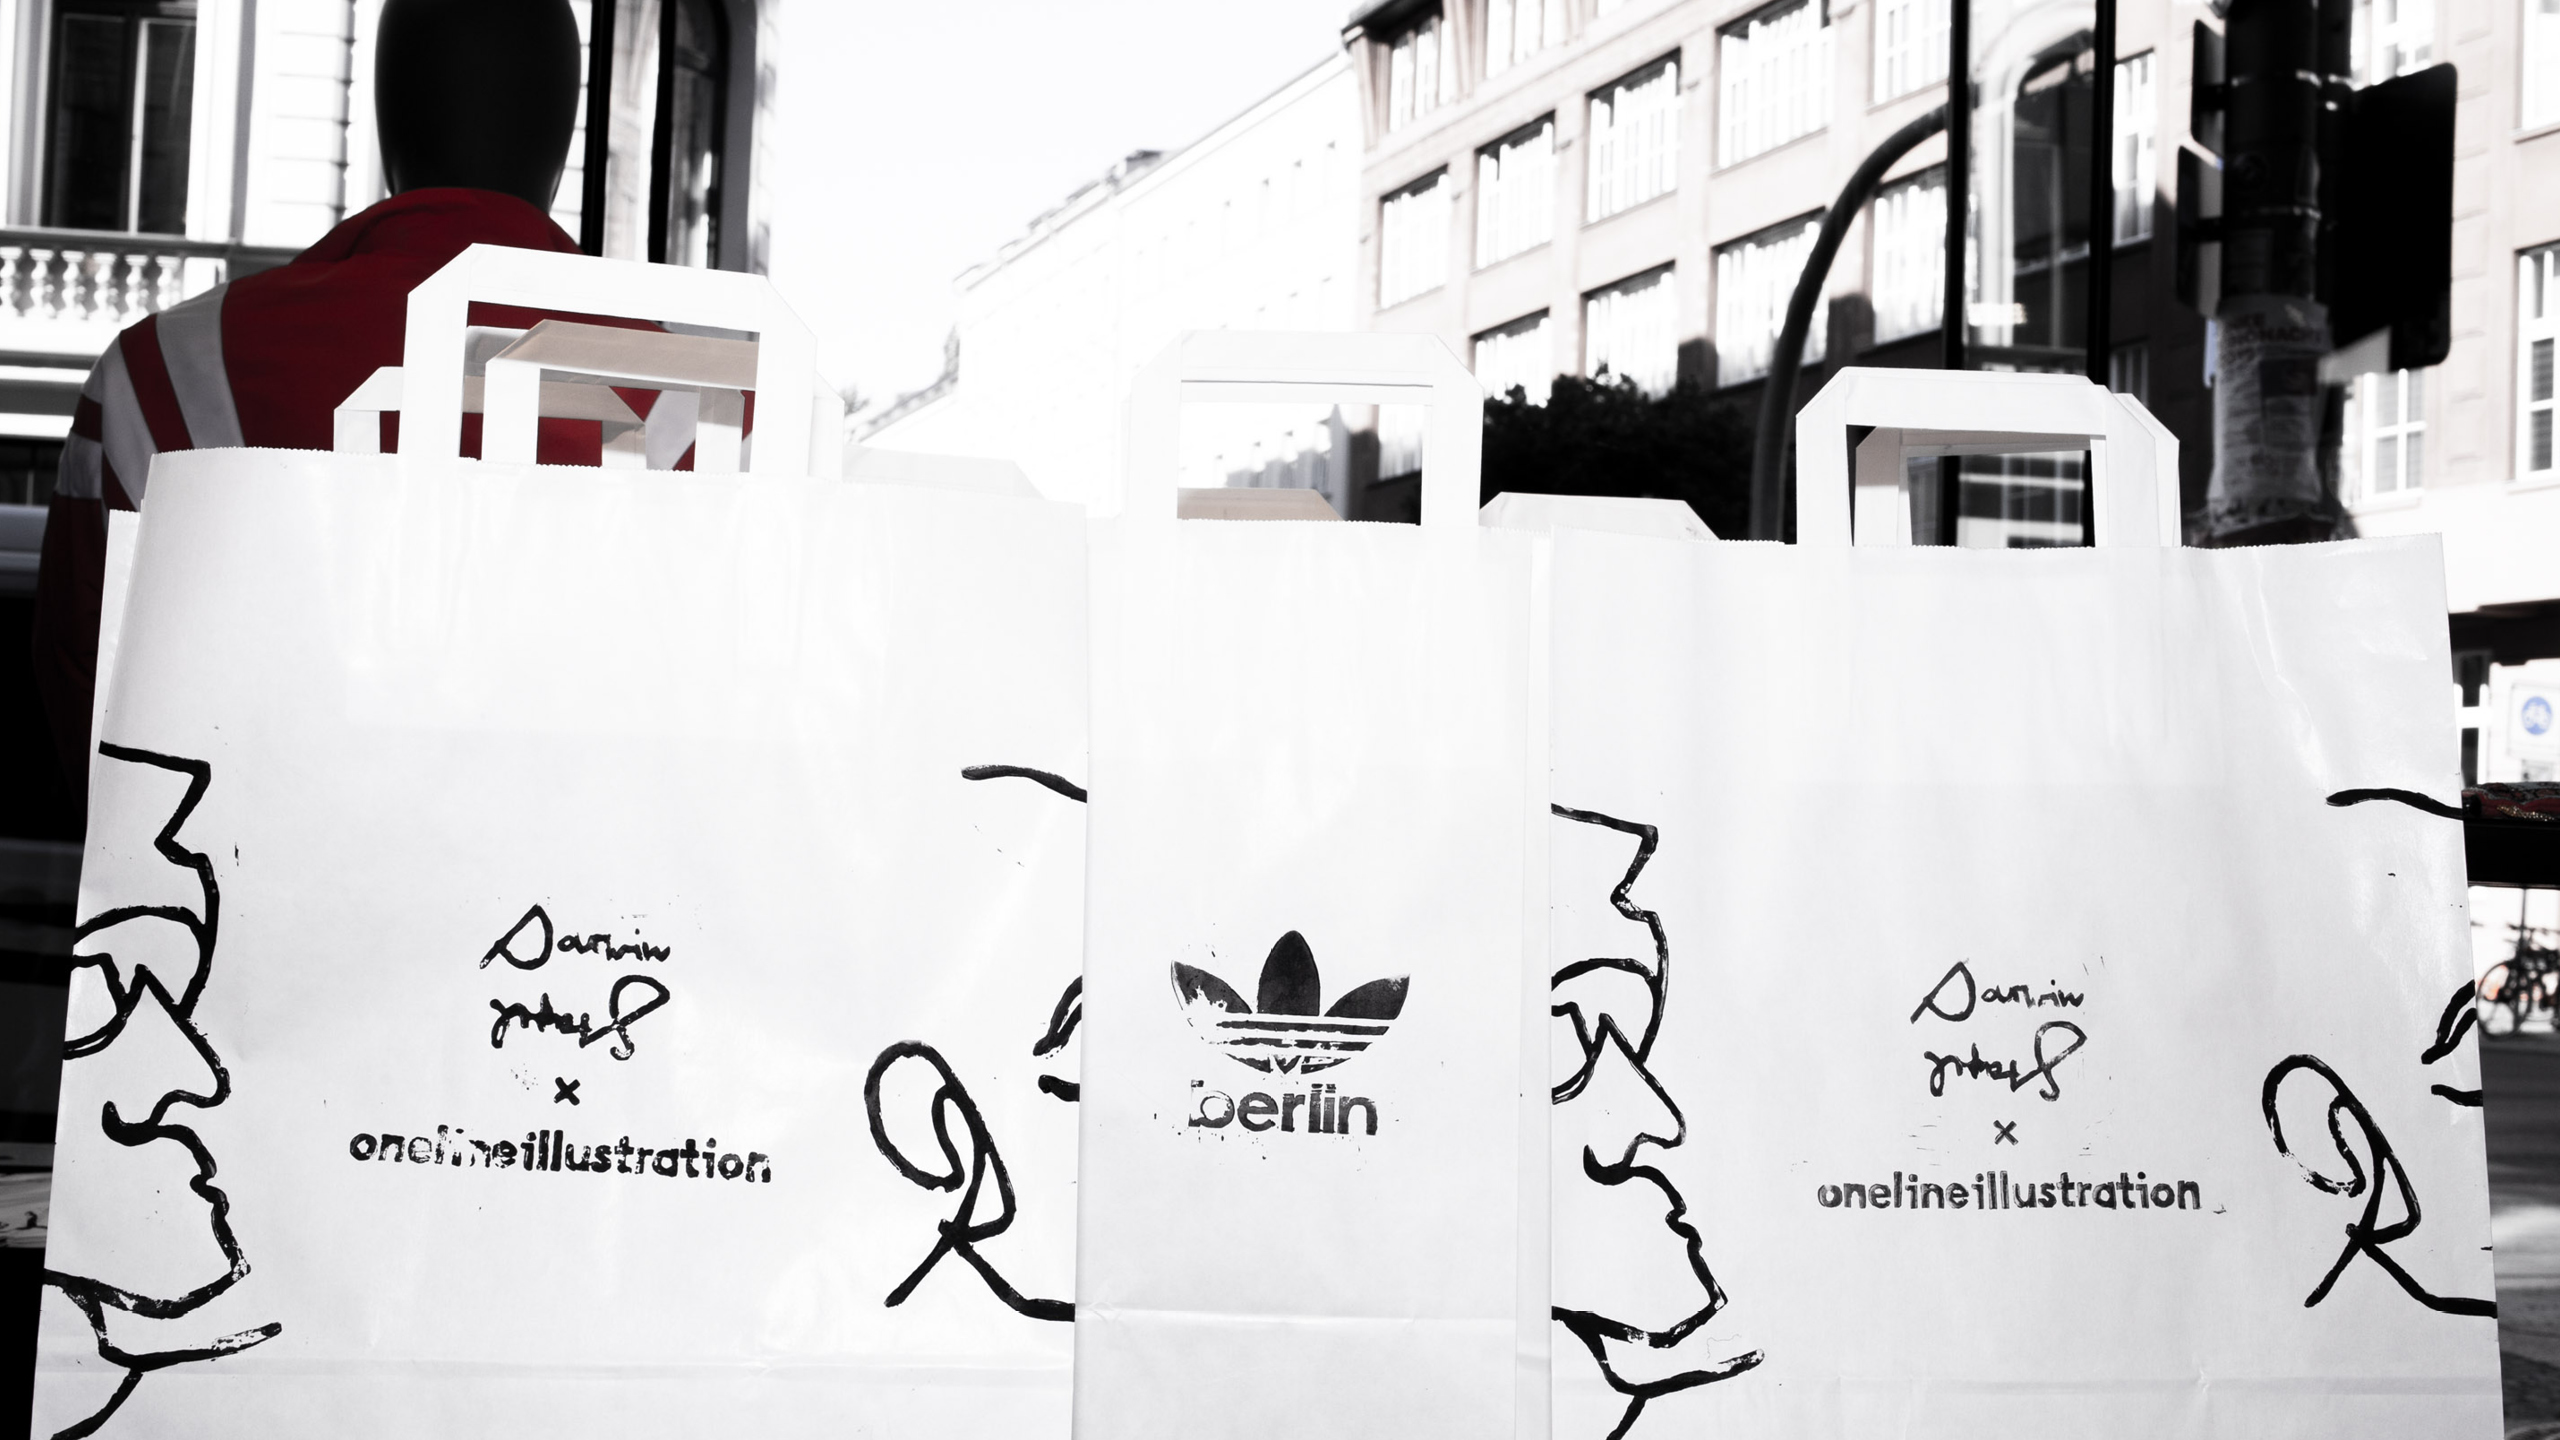 Darwin Stapel; one line illustration; onelineillustration; adidas; adidas Deutschland; adidas originals; adidas Berlin; adidas Flagship Store Berlin Mitte; comissioned; studio for visual concepts; 